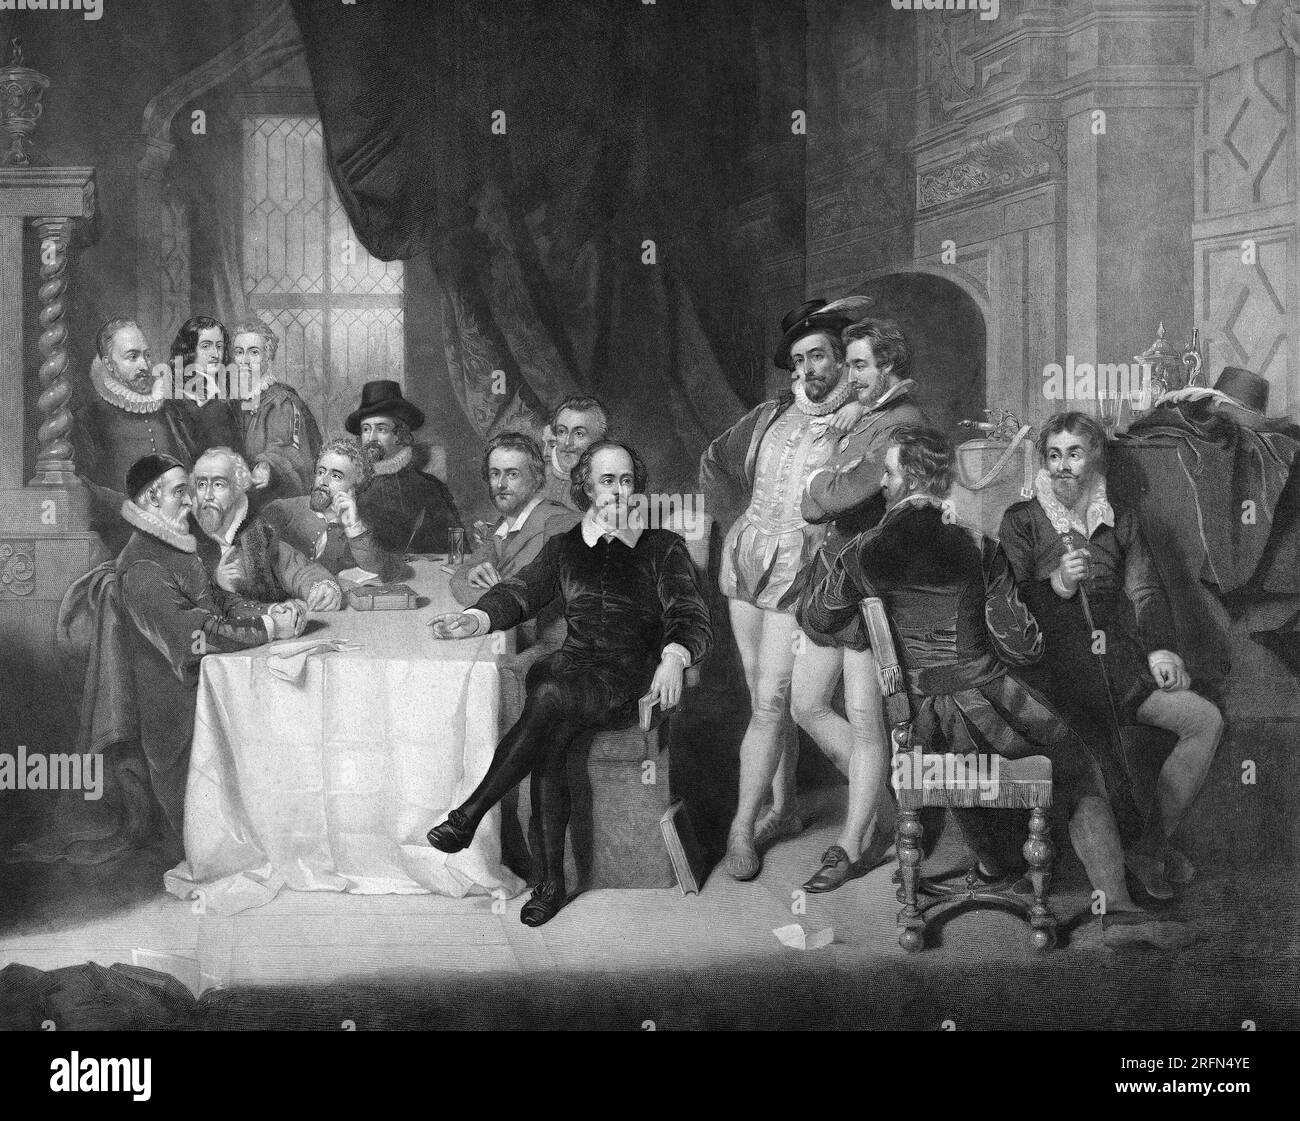 William Shakespeare, English poet and playwright, and his contemporaries at the Mermaid Tavern. Engraving by John Faed, 1850. Standing at left (l to r): Josuah Sylvester, John Selden, Francis Beaumont. Seated at table (l to r): Thomas Sackville, William Camden, John Fletcher, Francis Bacon, Ben Johnson, Samuel Daniel, John Donne, William Shakespeare. Standing and seated at right (l to r): Walter Raleigh, Henry Wriothesley, Robert Cotton, Thomas Dekker. Stock Photo